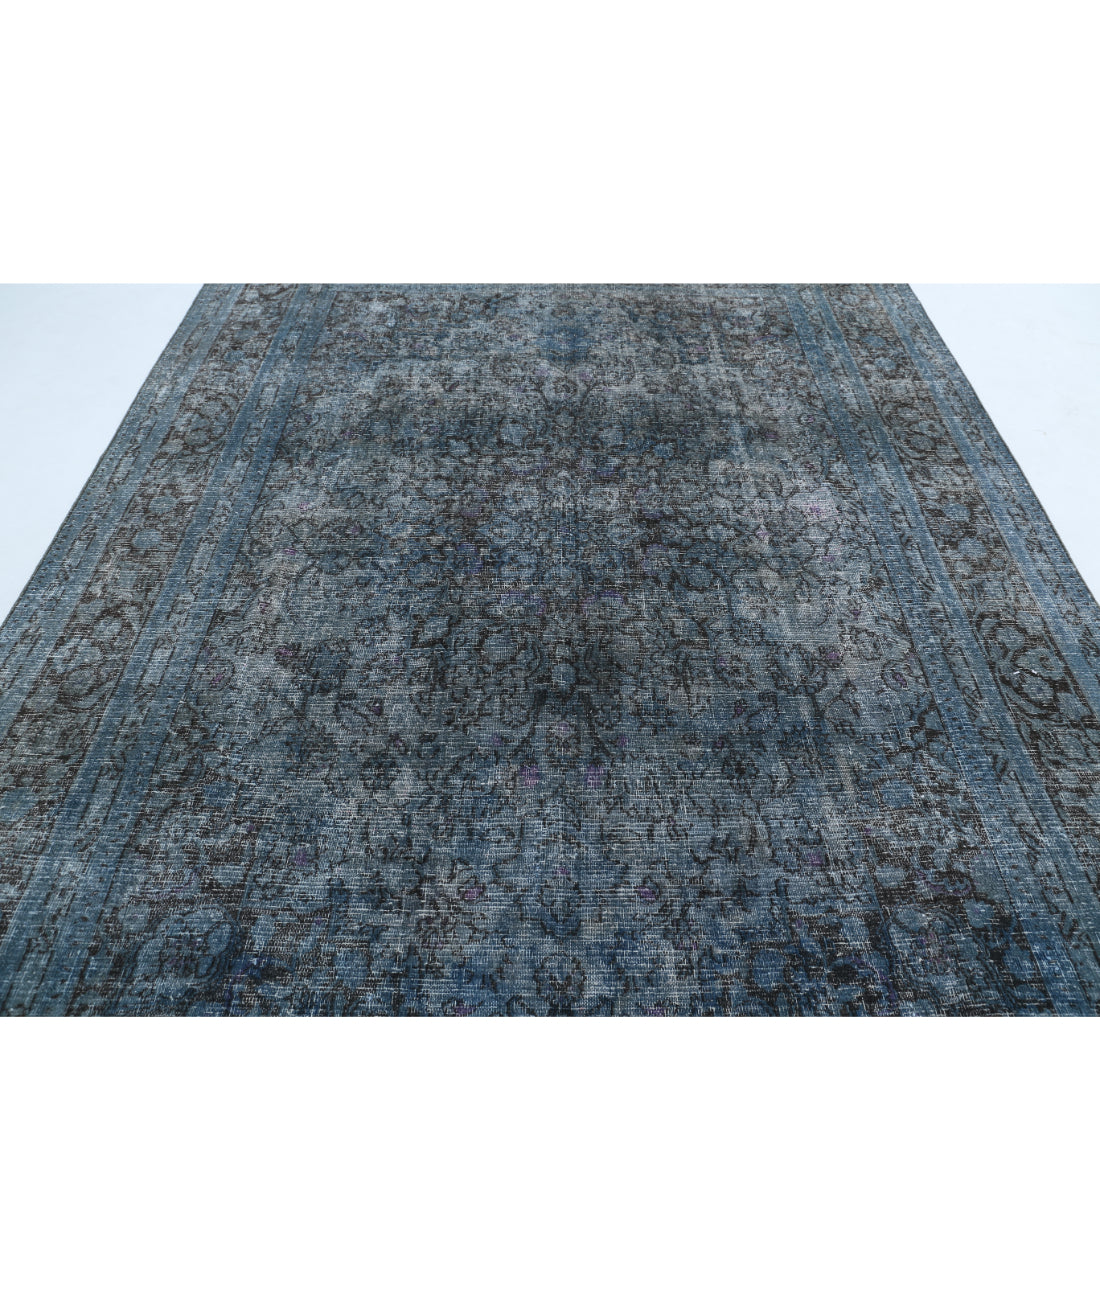 Hand Knotted Vintage Distressed Persian Kashan Wool Rug - 7'11'' x 10'10'' 7'11'' x 10'10'' (238 X 325) / Blue / Blue